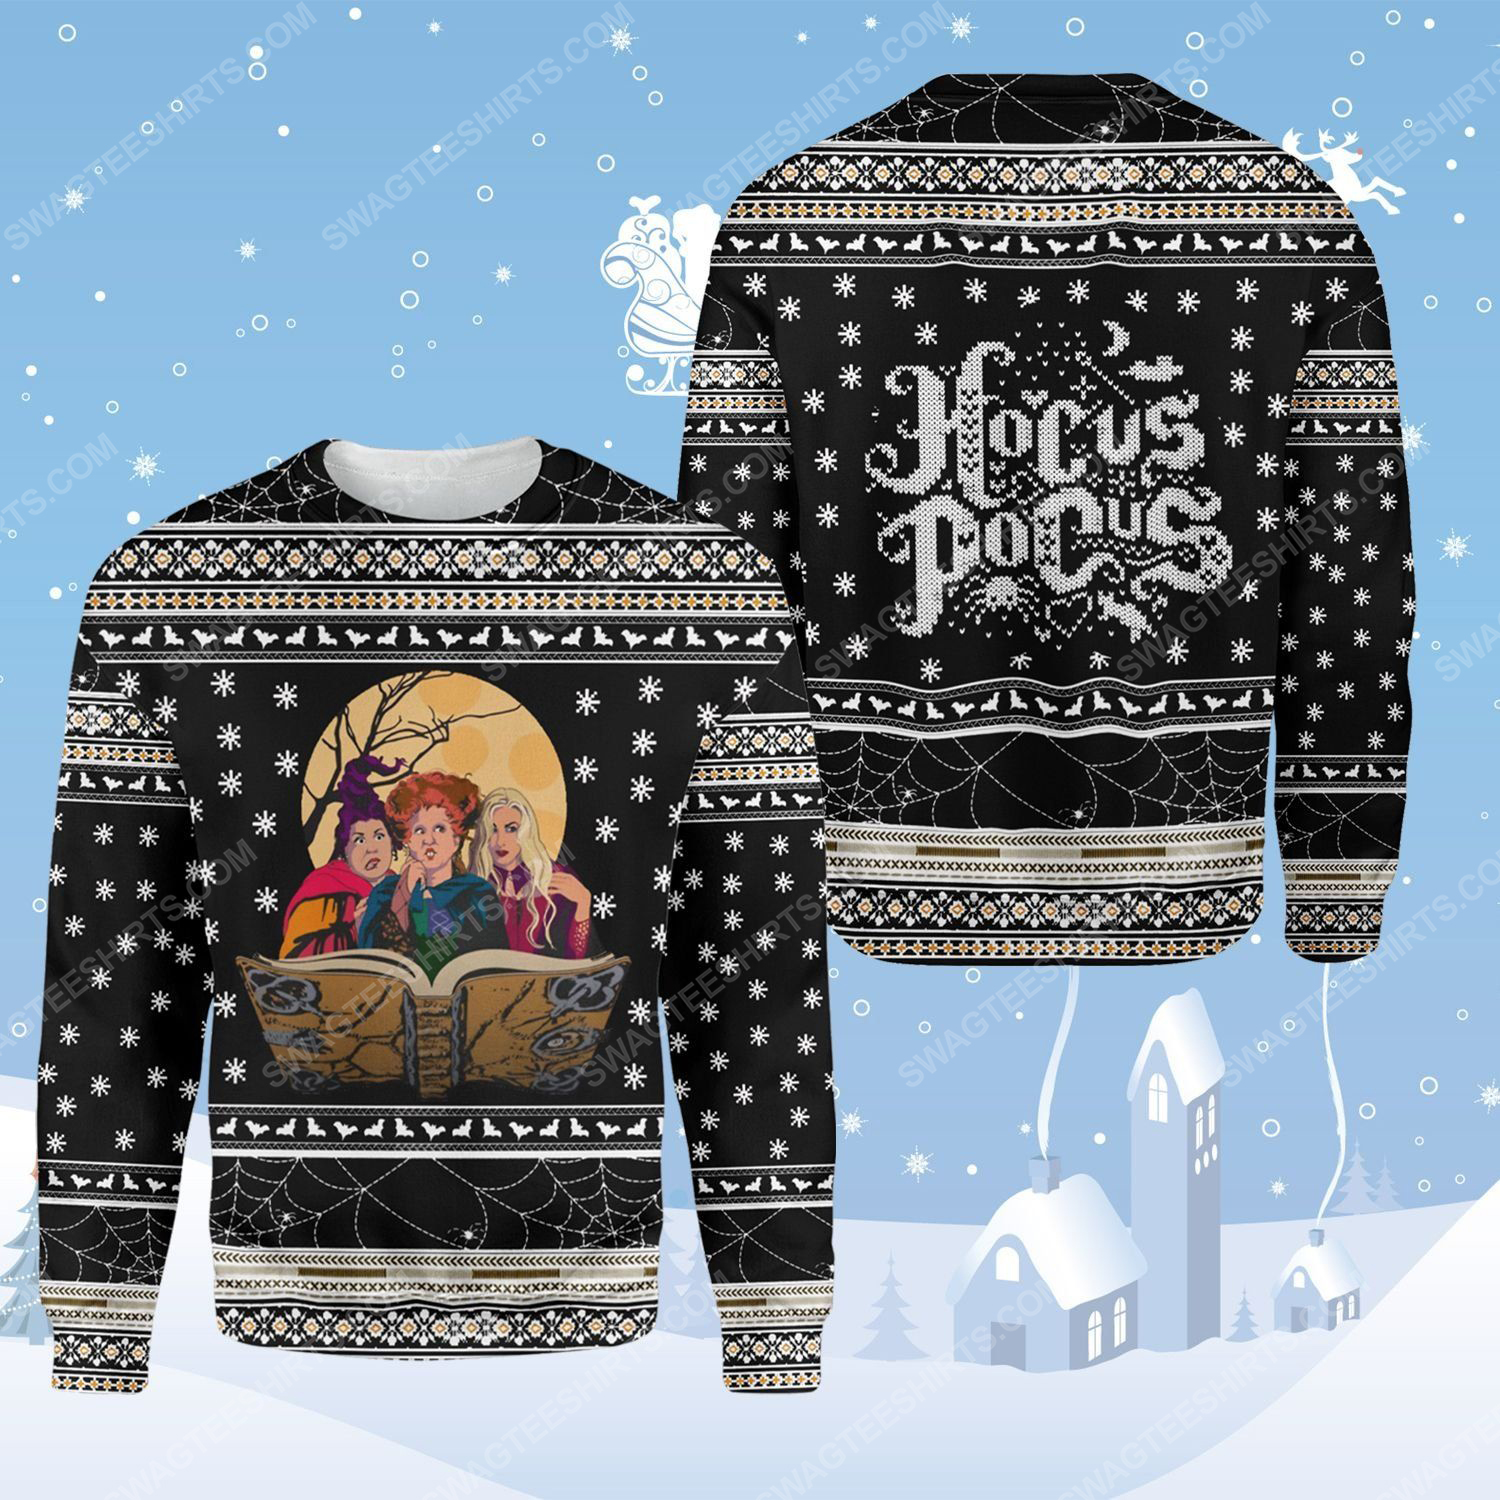 Hocus pocus witches ugly christmas sweater - Copy